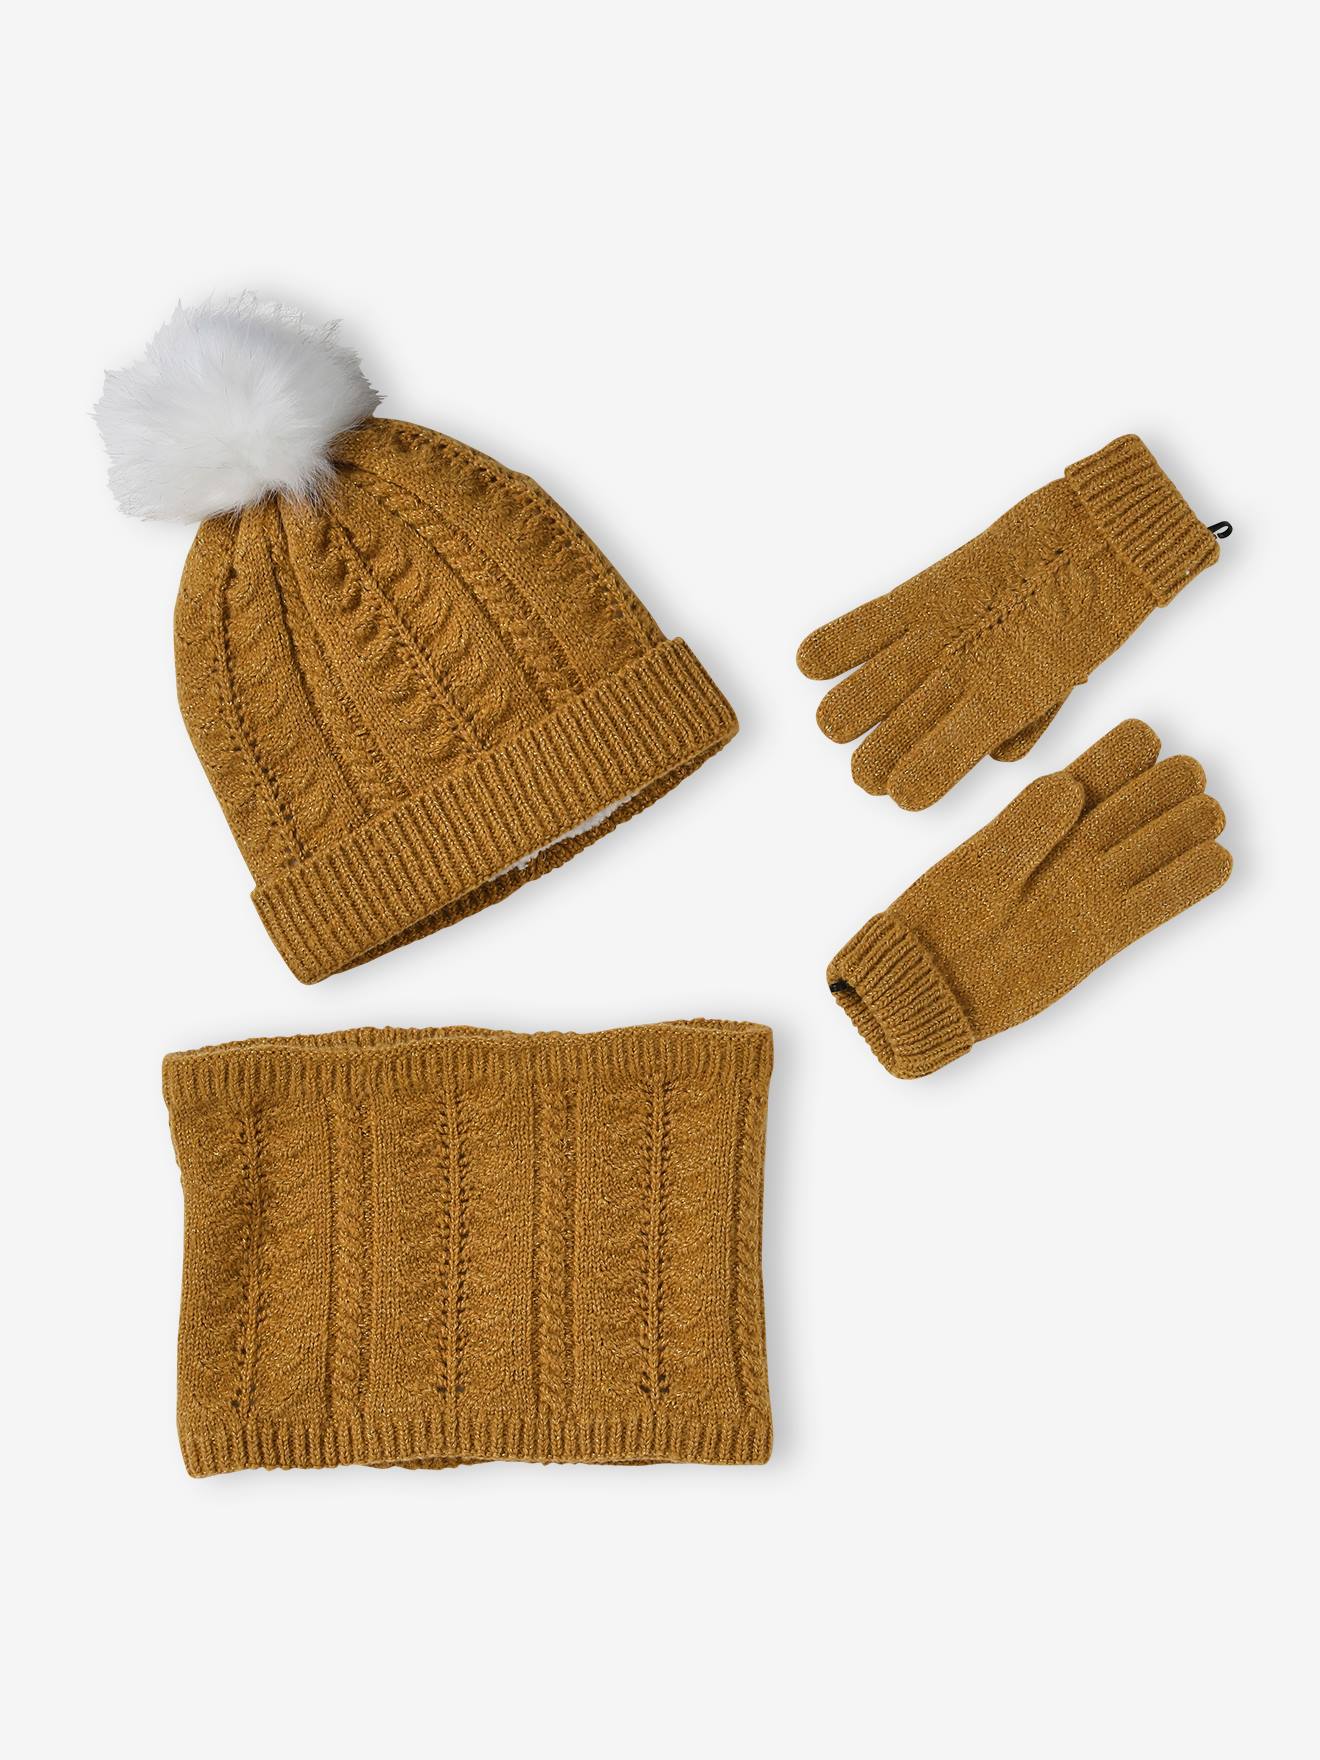 Beanie + Snood + Gloves or Mittens Set in Cable Knit for Girls mustard